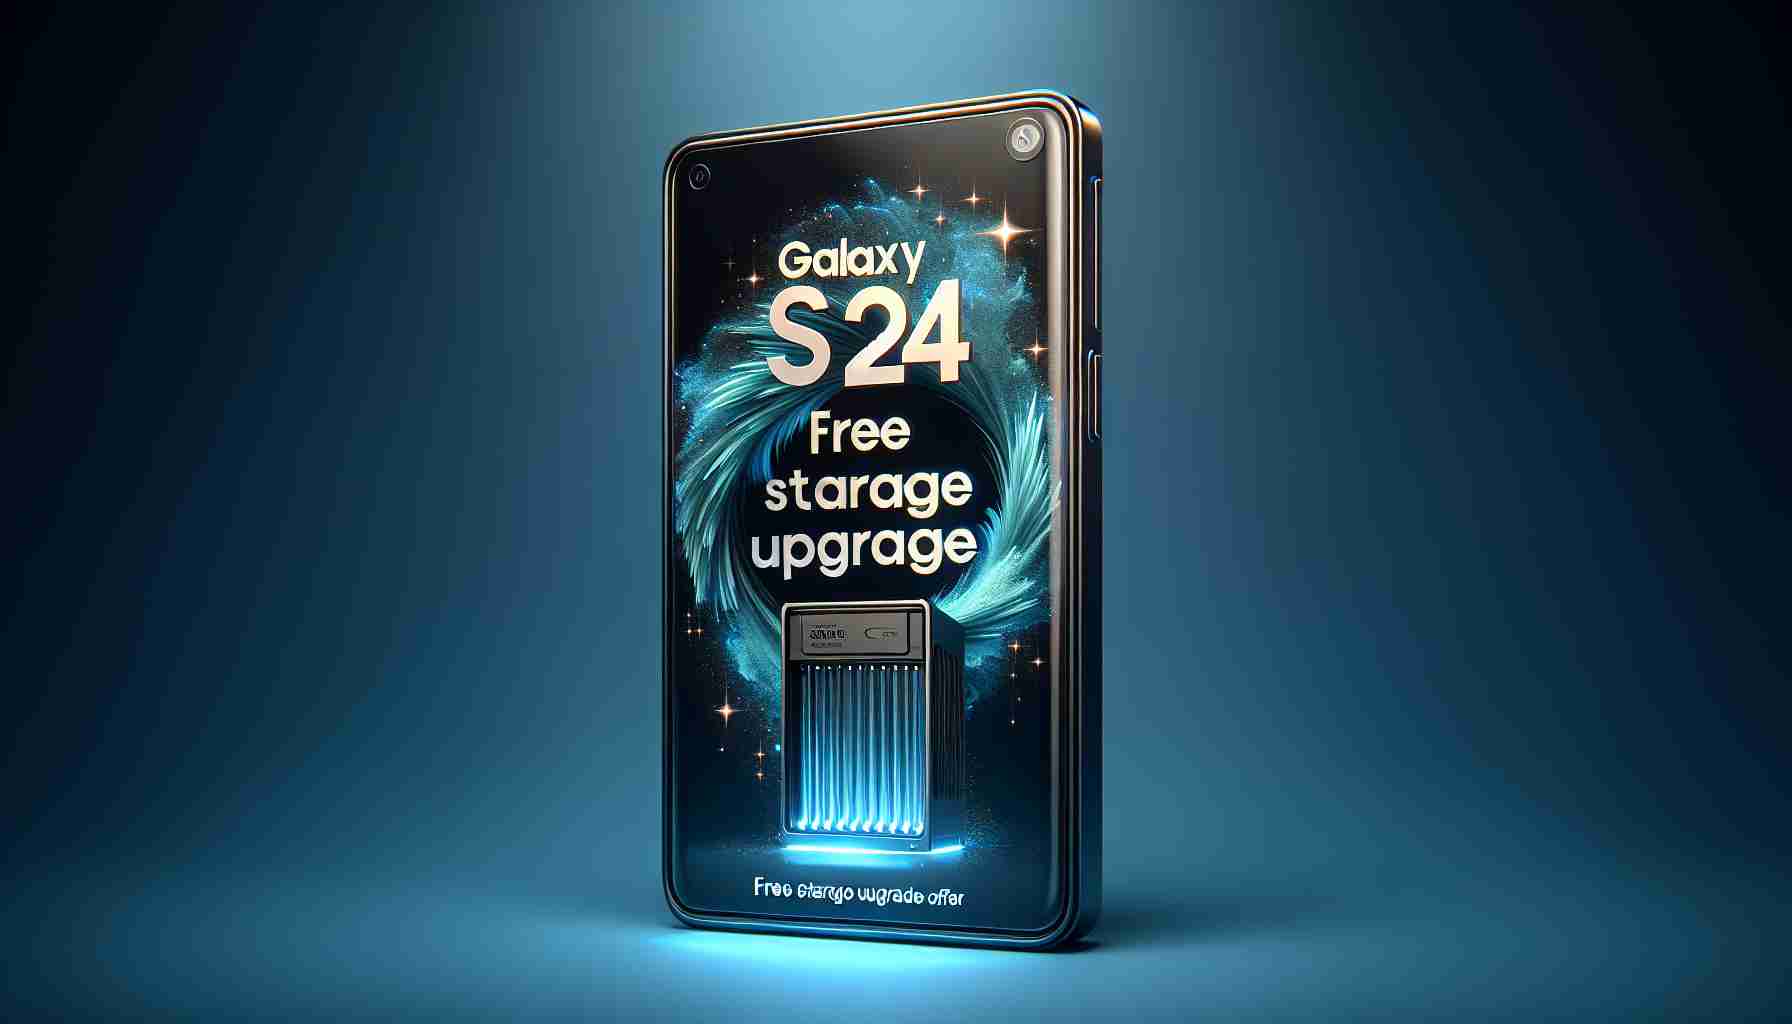 Upgrade Your Storage for Free with Samsung’s Galaxy S24 Series Promotion